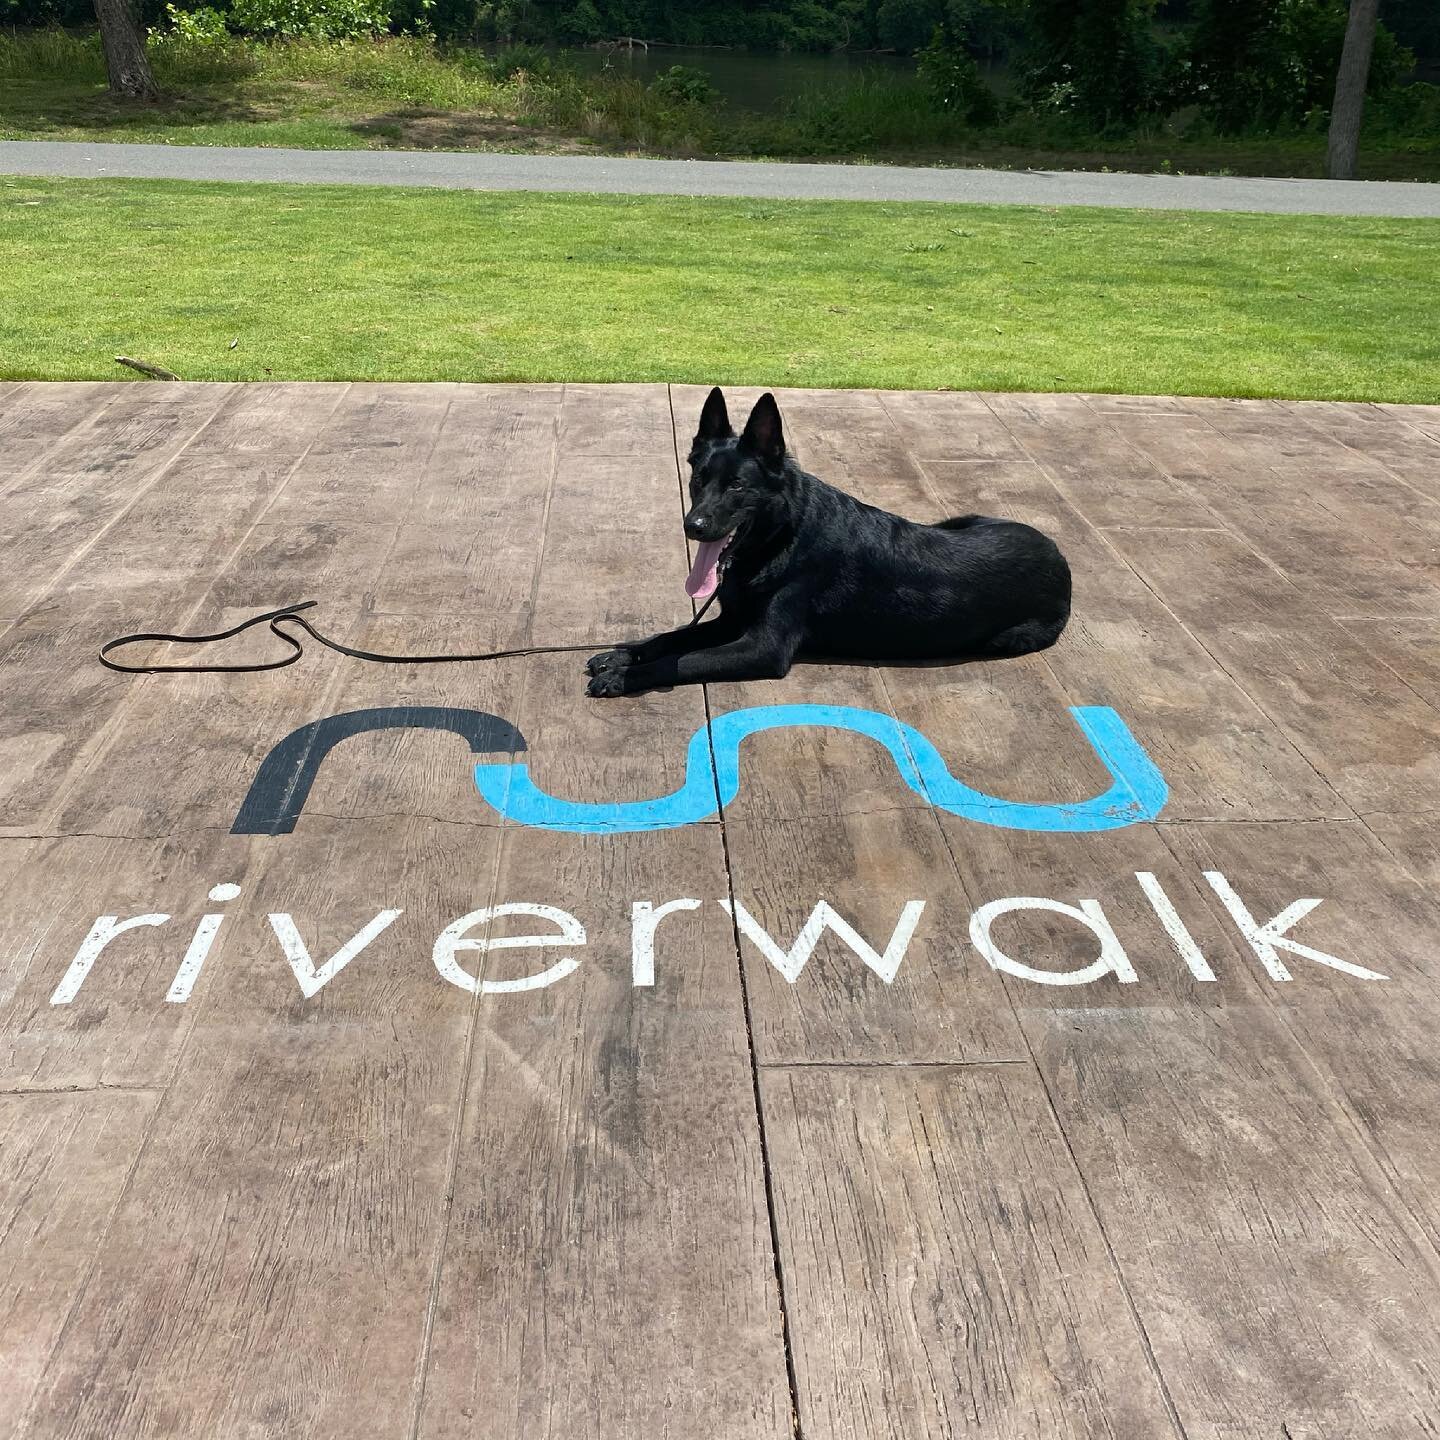 Rocco is finishing up his board and train with us soon. He&rsquo;s been doing great maintaining control under distraction in lots of settings. #seeleycreekcanine #blackgsd #blackgermanshepherd #germanshepherdsofinstagram #gsd #gsdofinstagram #blackge